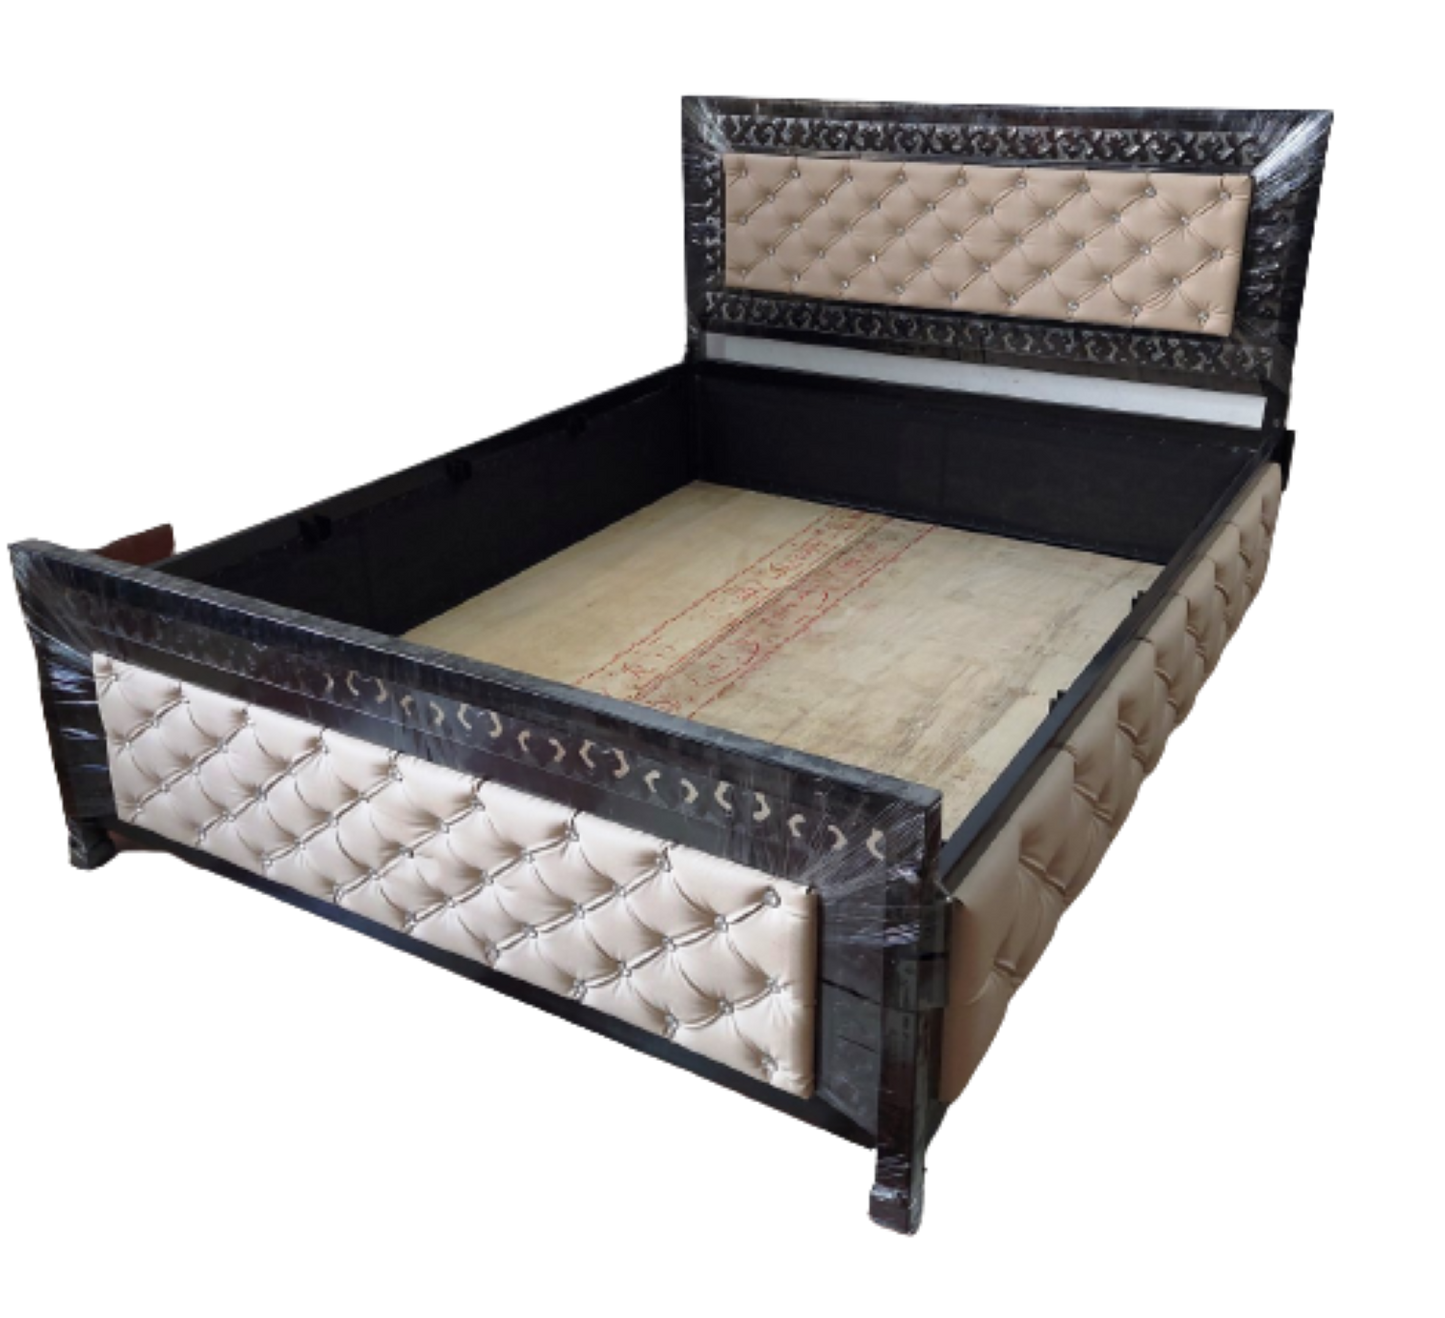 Bowzar Metal Iron Box Bed With Storage Palang Cot Upholstered Design All Sides Design